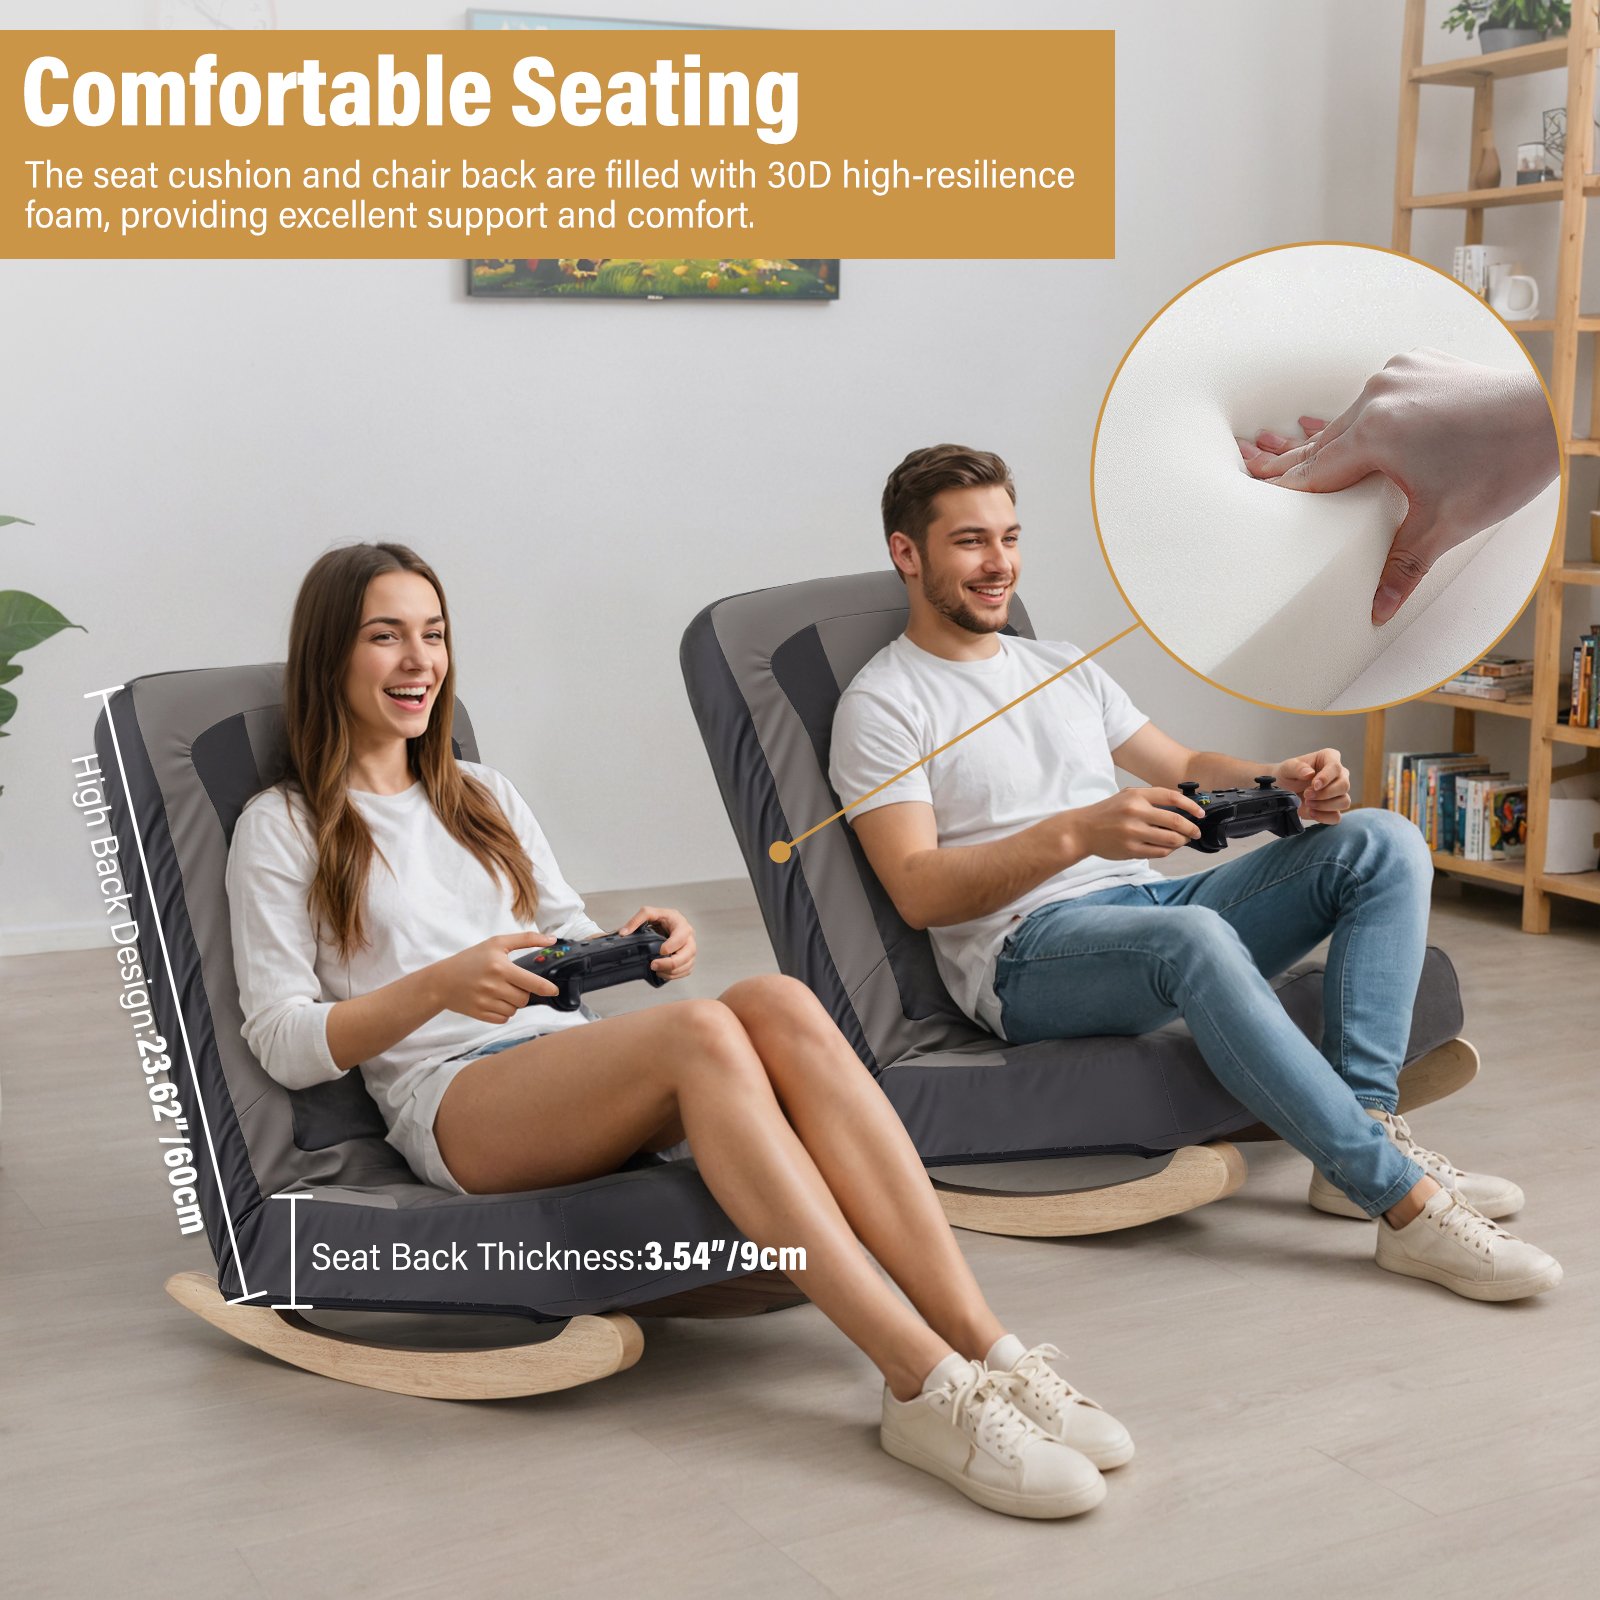 TOPSKY Floor Rocking Gaming Chair, Reclining Padded Backrest Chair with 5 Adjustable Positions and Solid Wood Base for Gaming and Relaxing XY-CR-791N